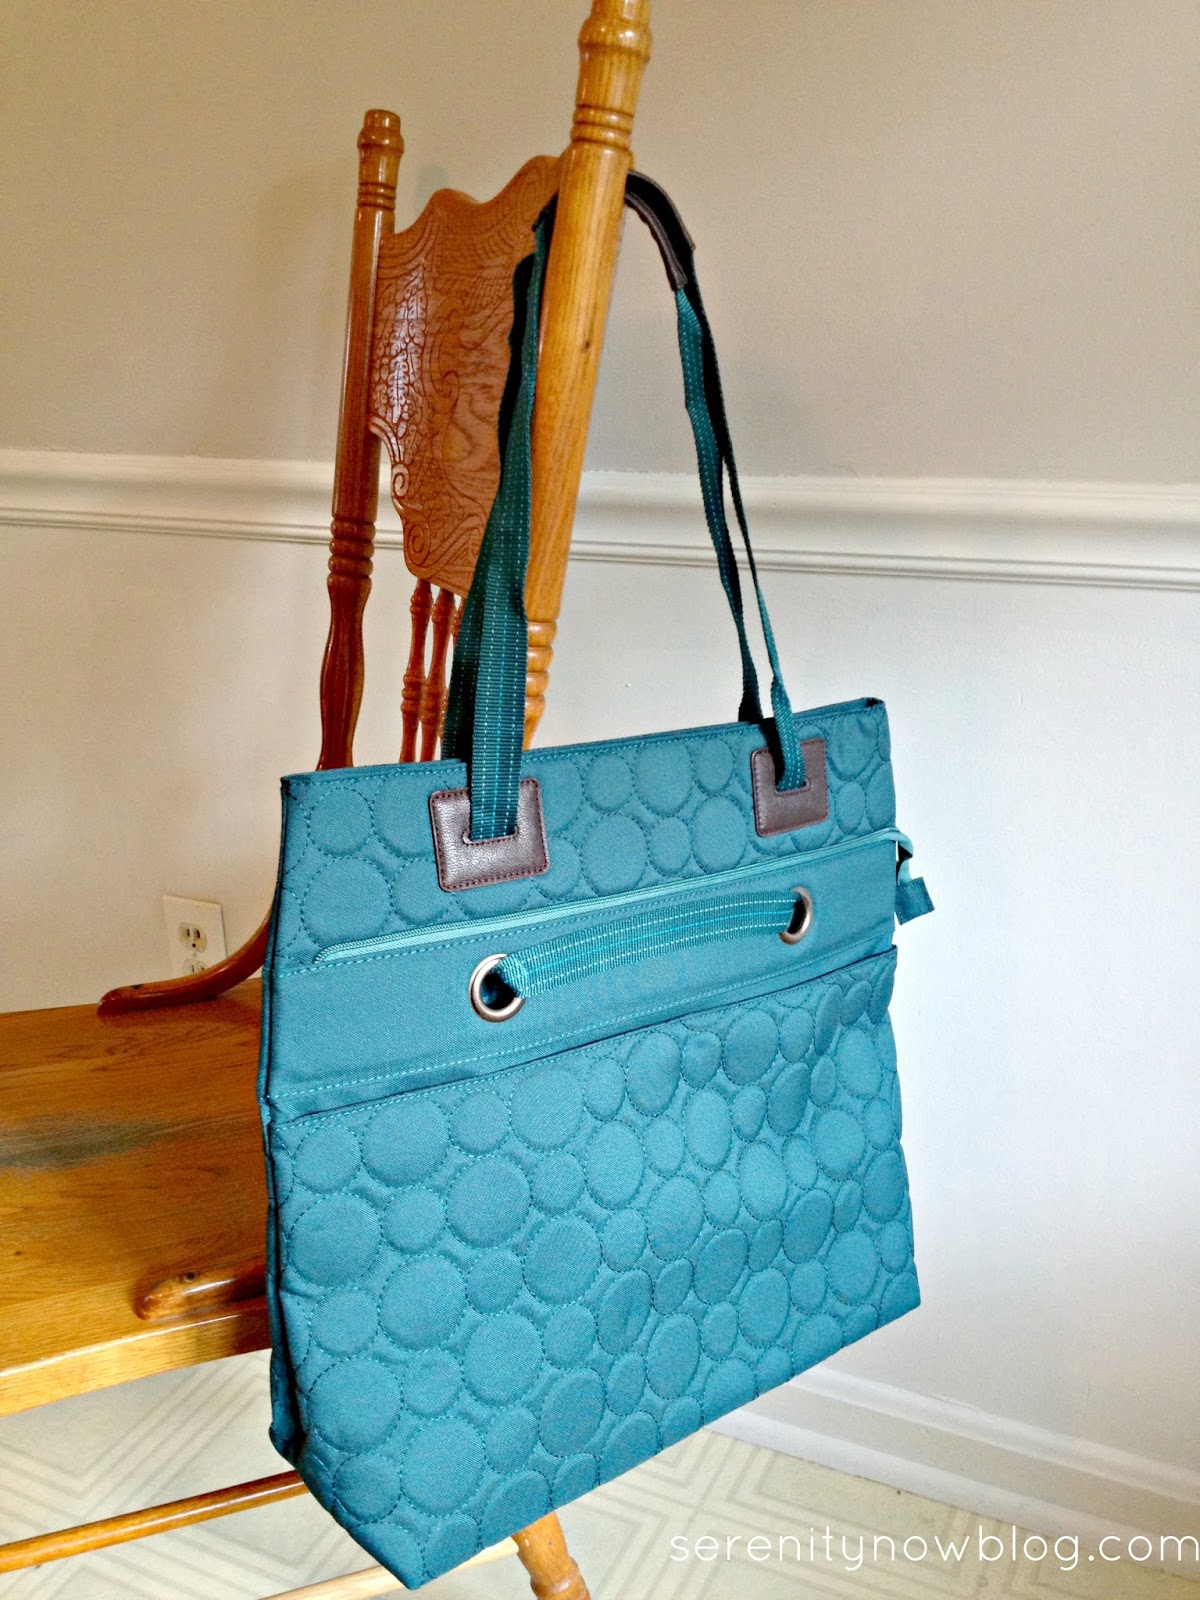 fell in love with the color, the perfect deep shade of teal for Fall ...